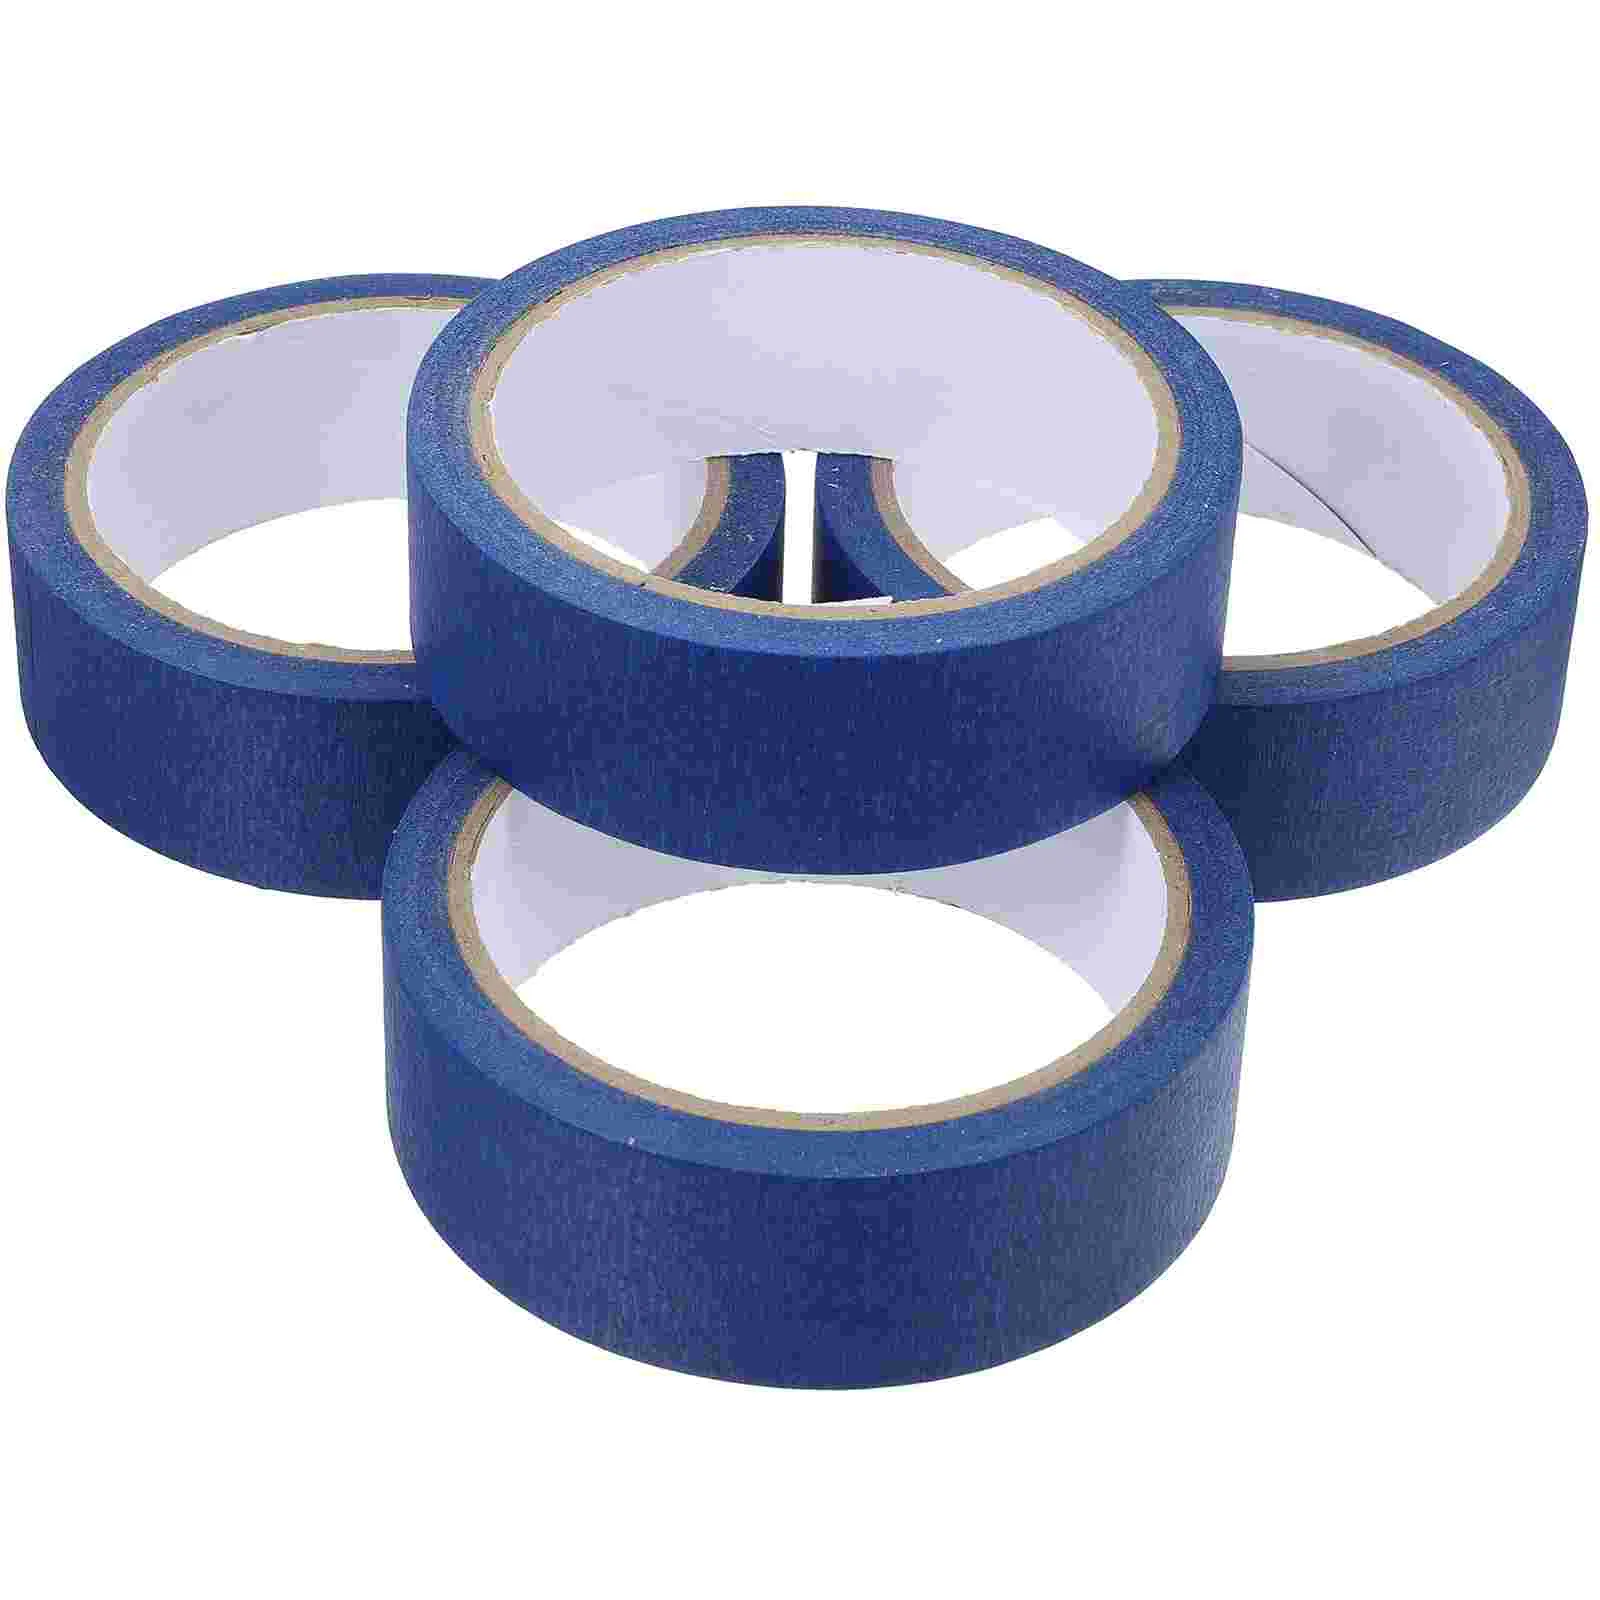 Blue Masking Tape DIY Tapes Crafts Adhesive Paint for Painting Painter Duct ransitute r988 cartoon dog washi masking tapes life stationery decorative adhesive scrapbooking diy paper office stickers